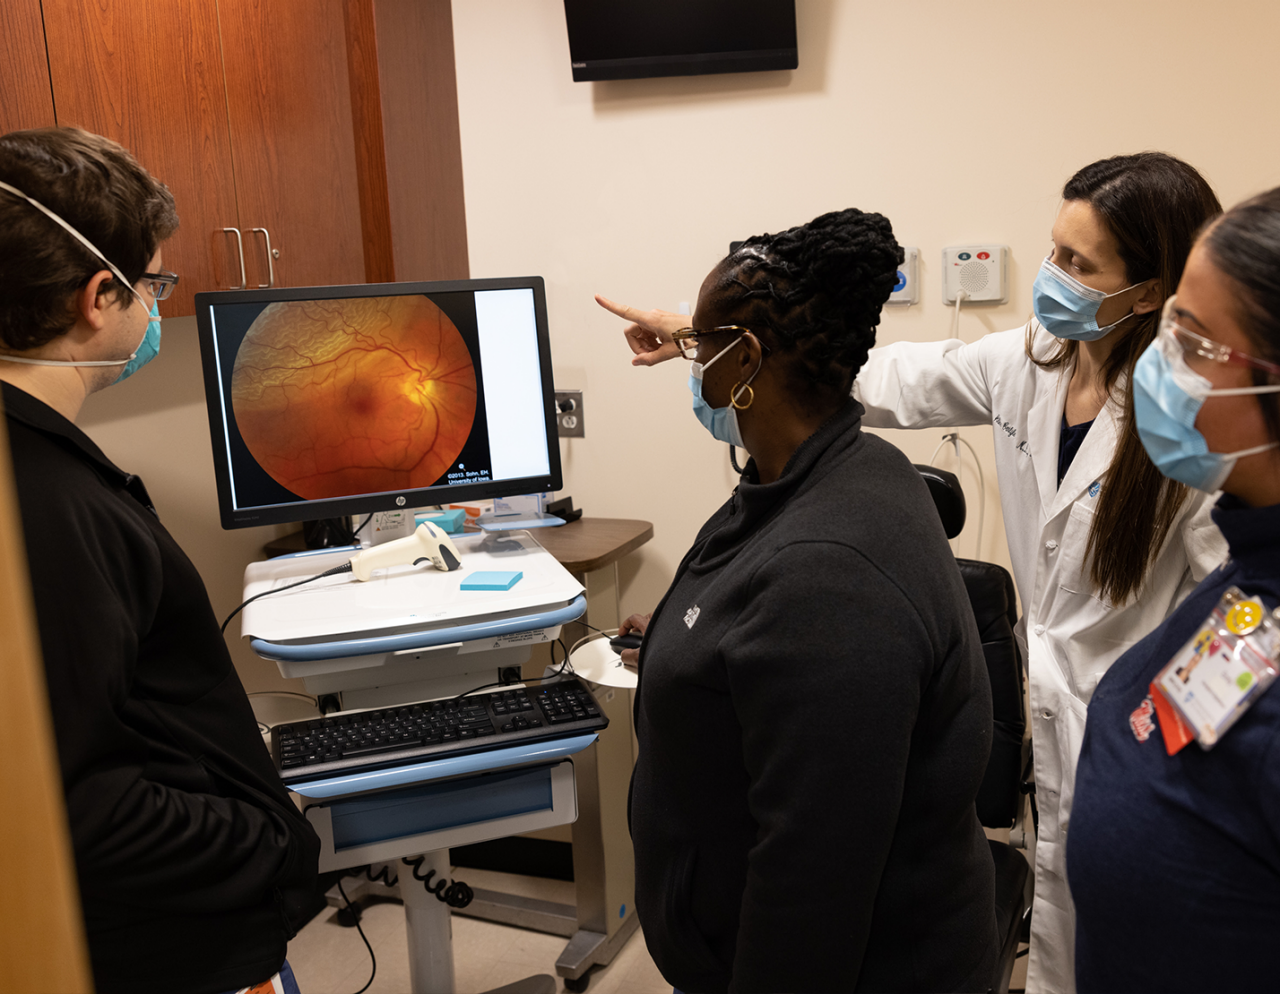 group of clinician and staff viewing a medical image on a monitor